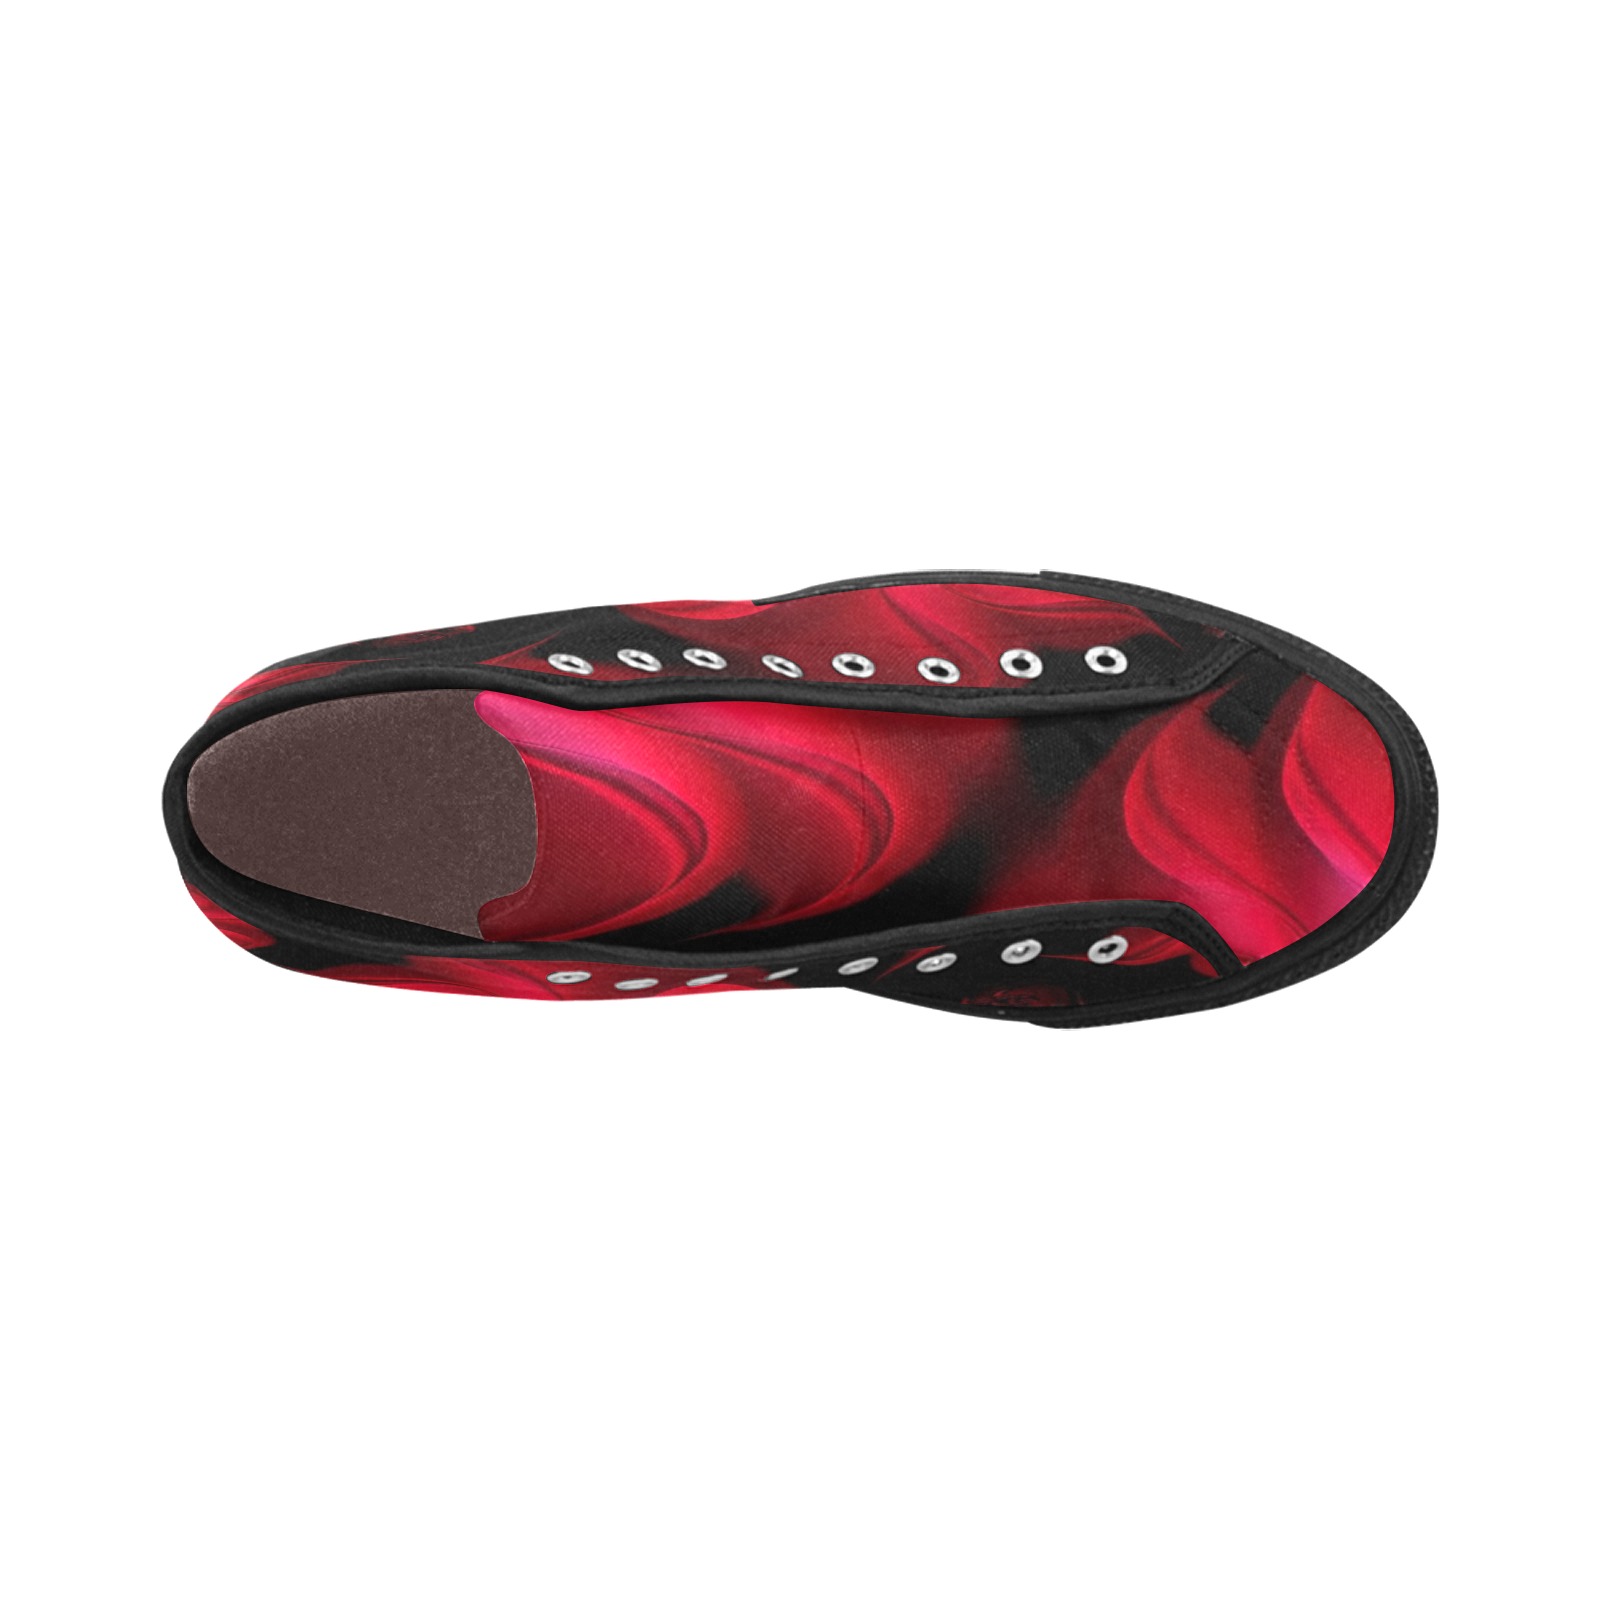 Black and Red Fiery Whirlpools Fractal Abstract Vancouver H Men's Canvas Shoes (1013-1)